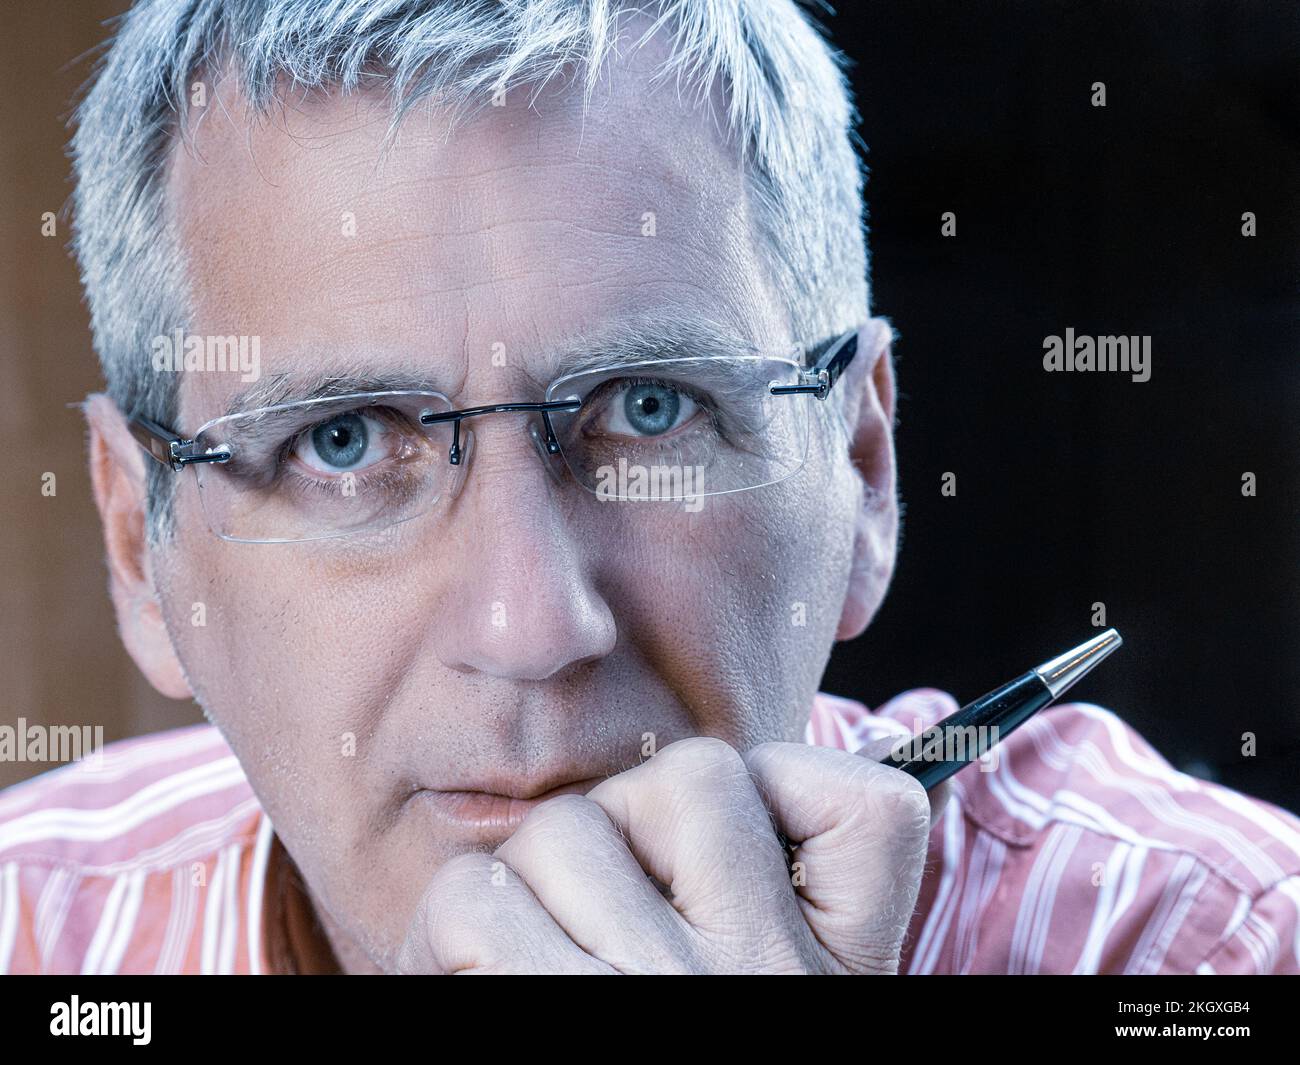 Businessman man male 50s face, mature wearing glasses close up with hand on chin holding a pen looking directly to camera, with serious expression Stock Photo